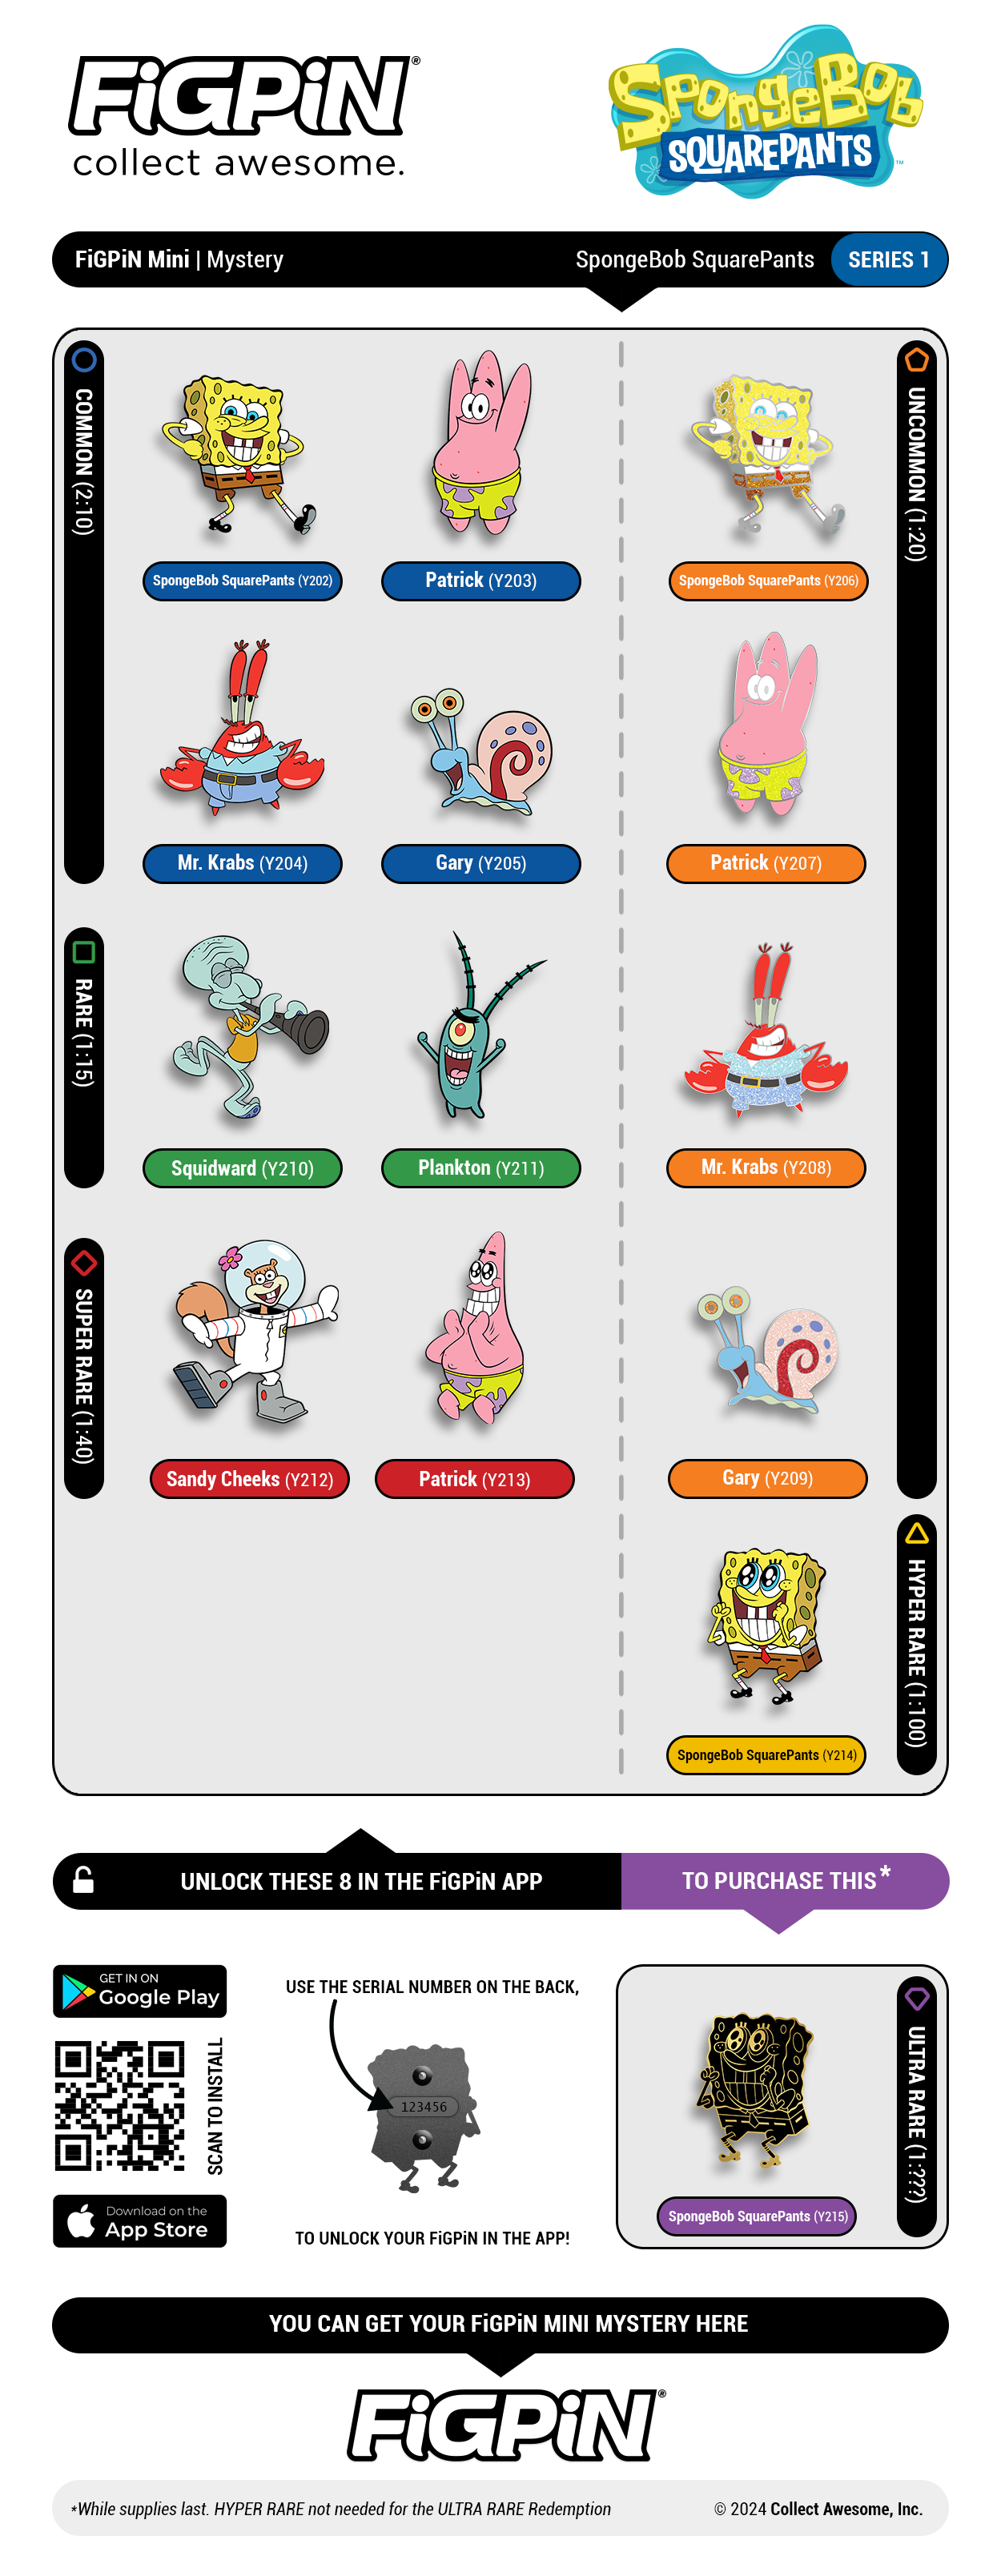 Rarity Sheet breaking down SpongeBob Squarepants Mystery Minis collectibility. Sheet contains item numbers, rarities per character, and how to unlock on the FiGPiN APP